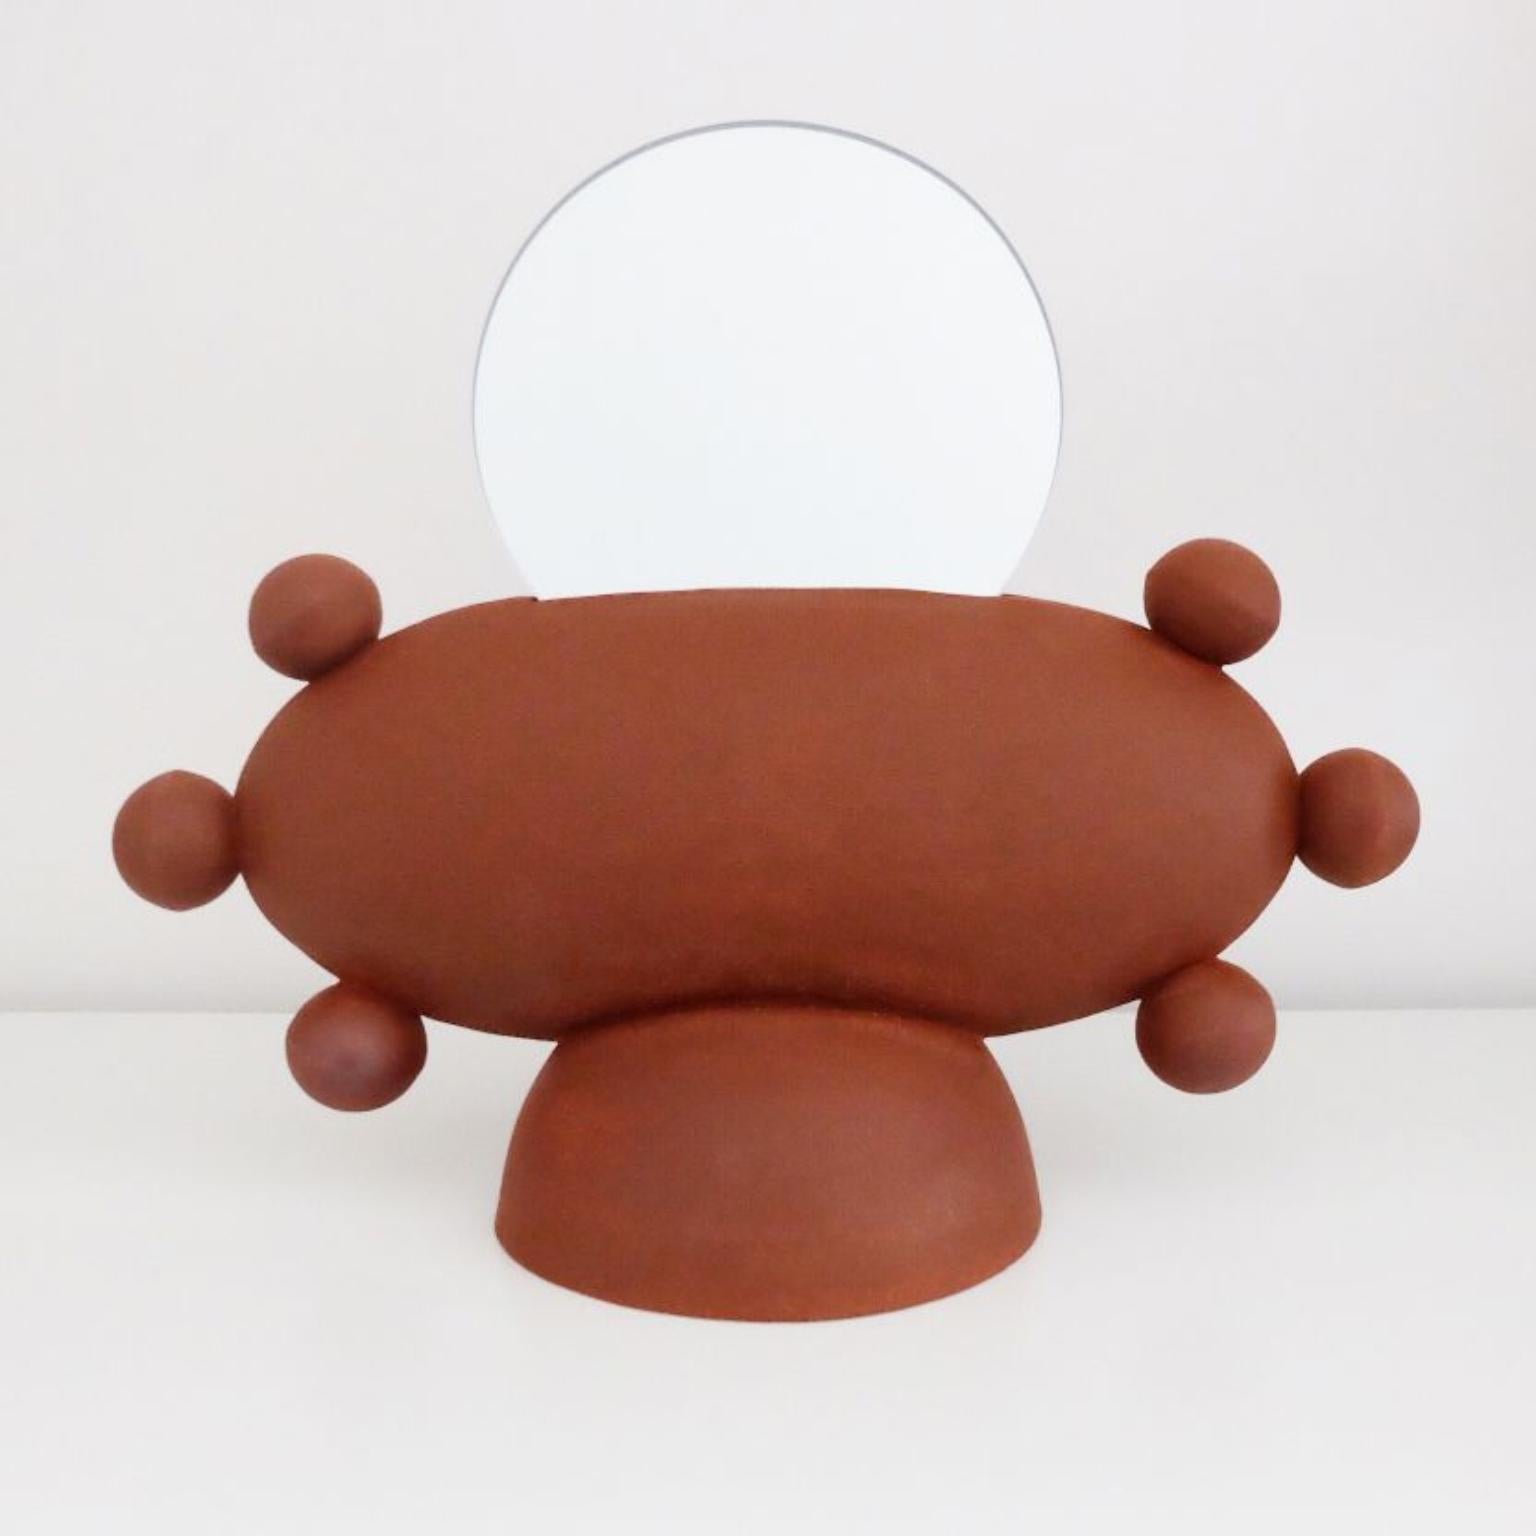 Unique UFO Mirror by Ia Kutateladze
Dimensions: W 33 x H 26 cm
Materials: Clay
UFO 02 is a hand built ceramic mirror. Playful and bold functional decorative object, for various types of interiors.
IAAI / Ia Kutateladze is a Georgian